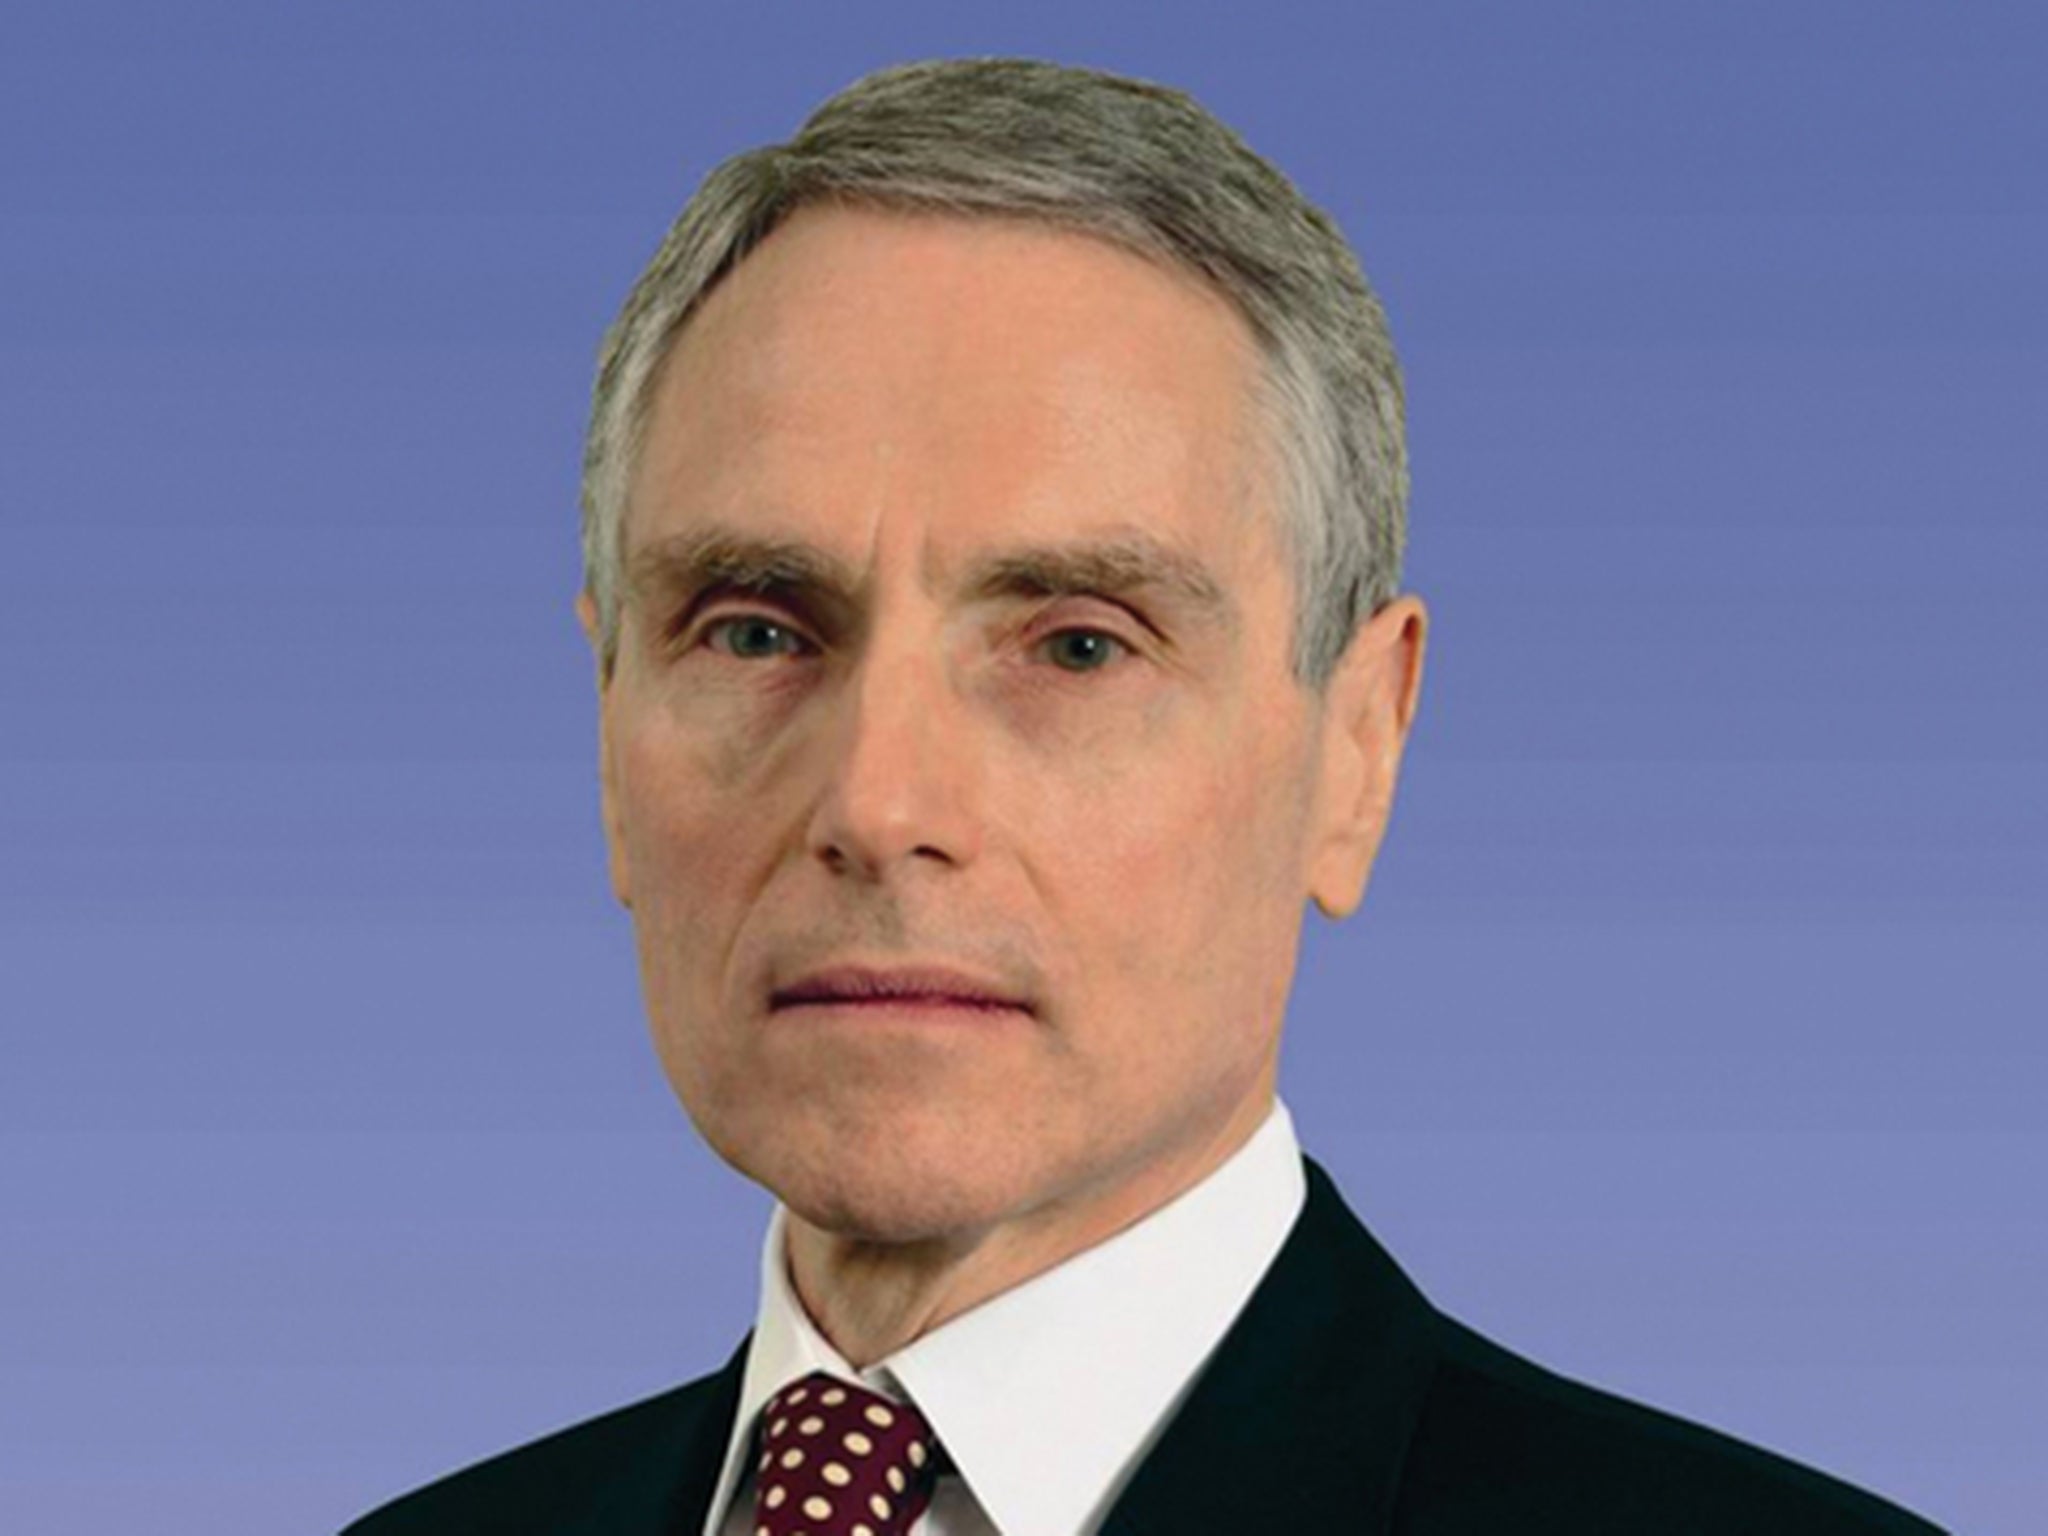 Edward Bramson is the founder of Sherborne Investors, which owns 30 per cent of Electra